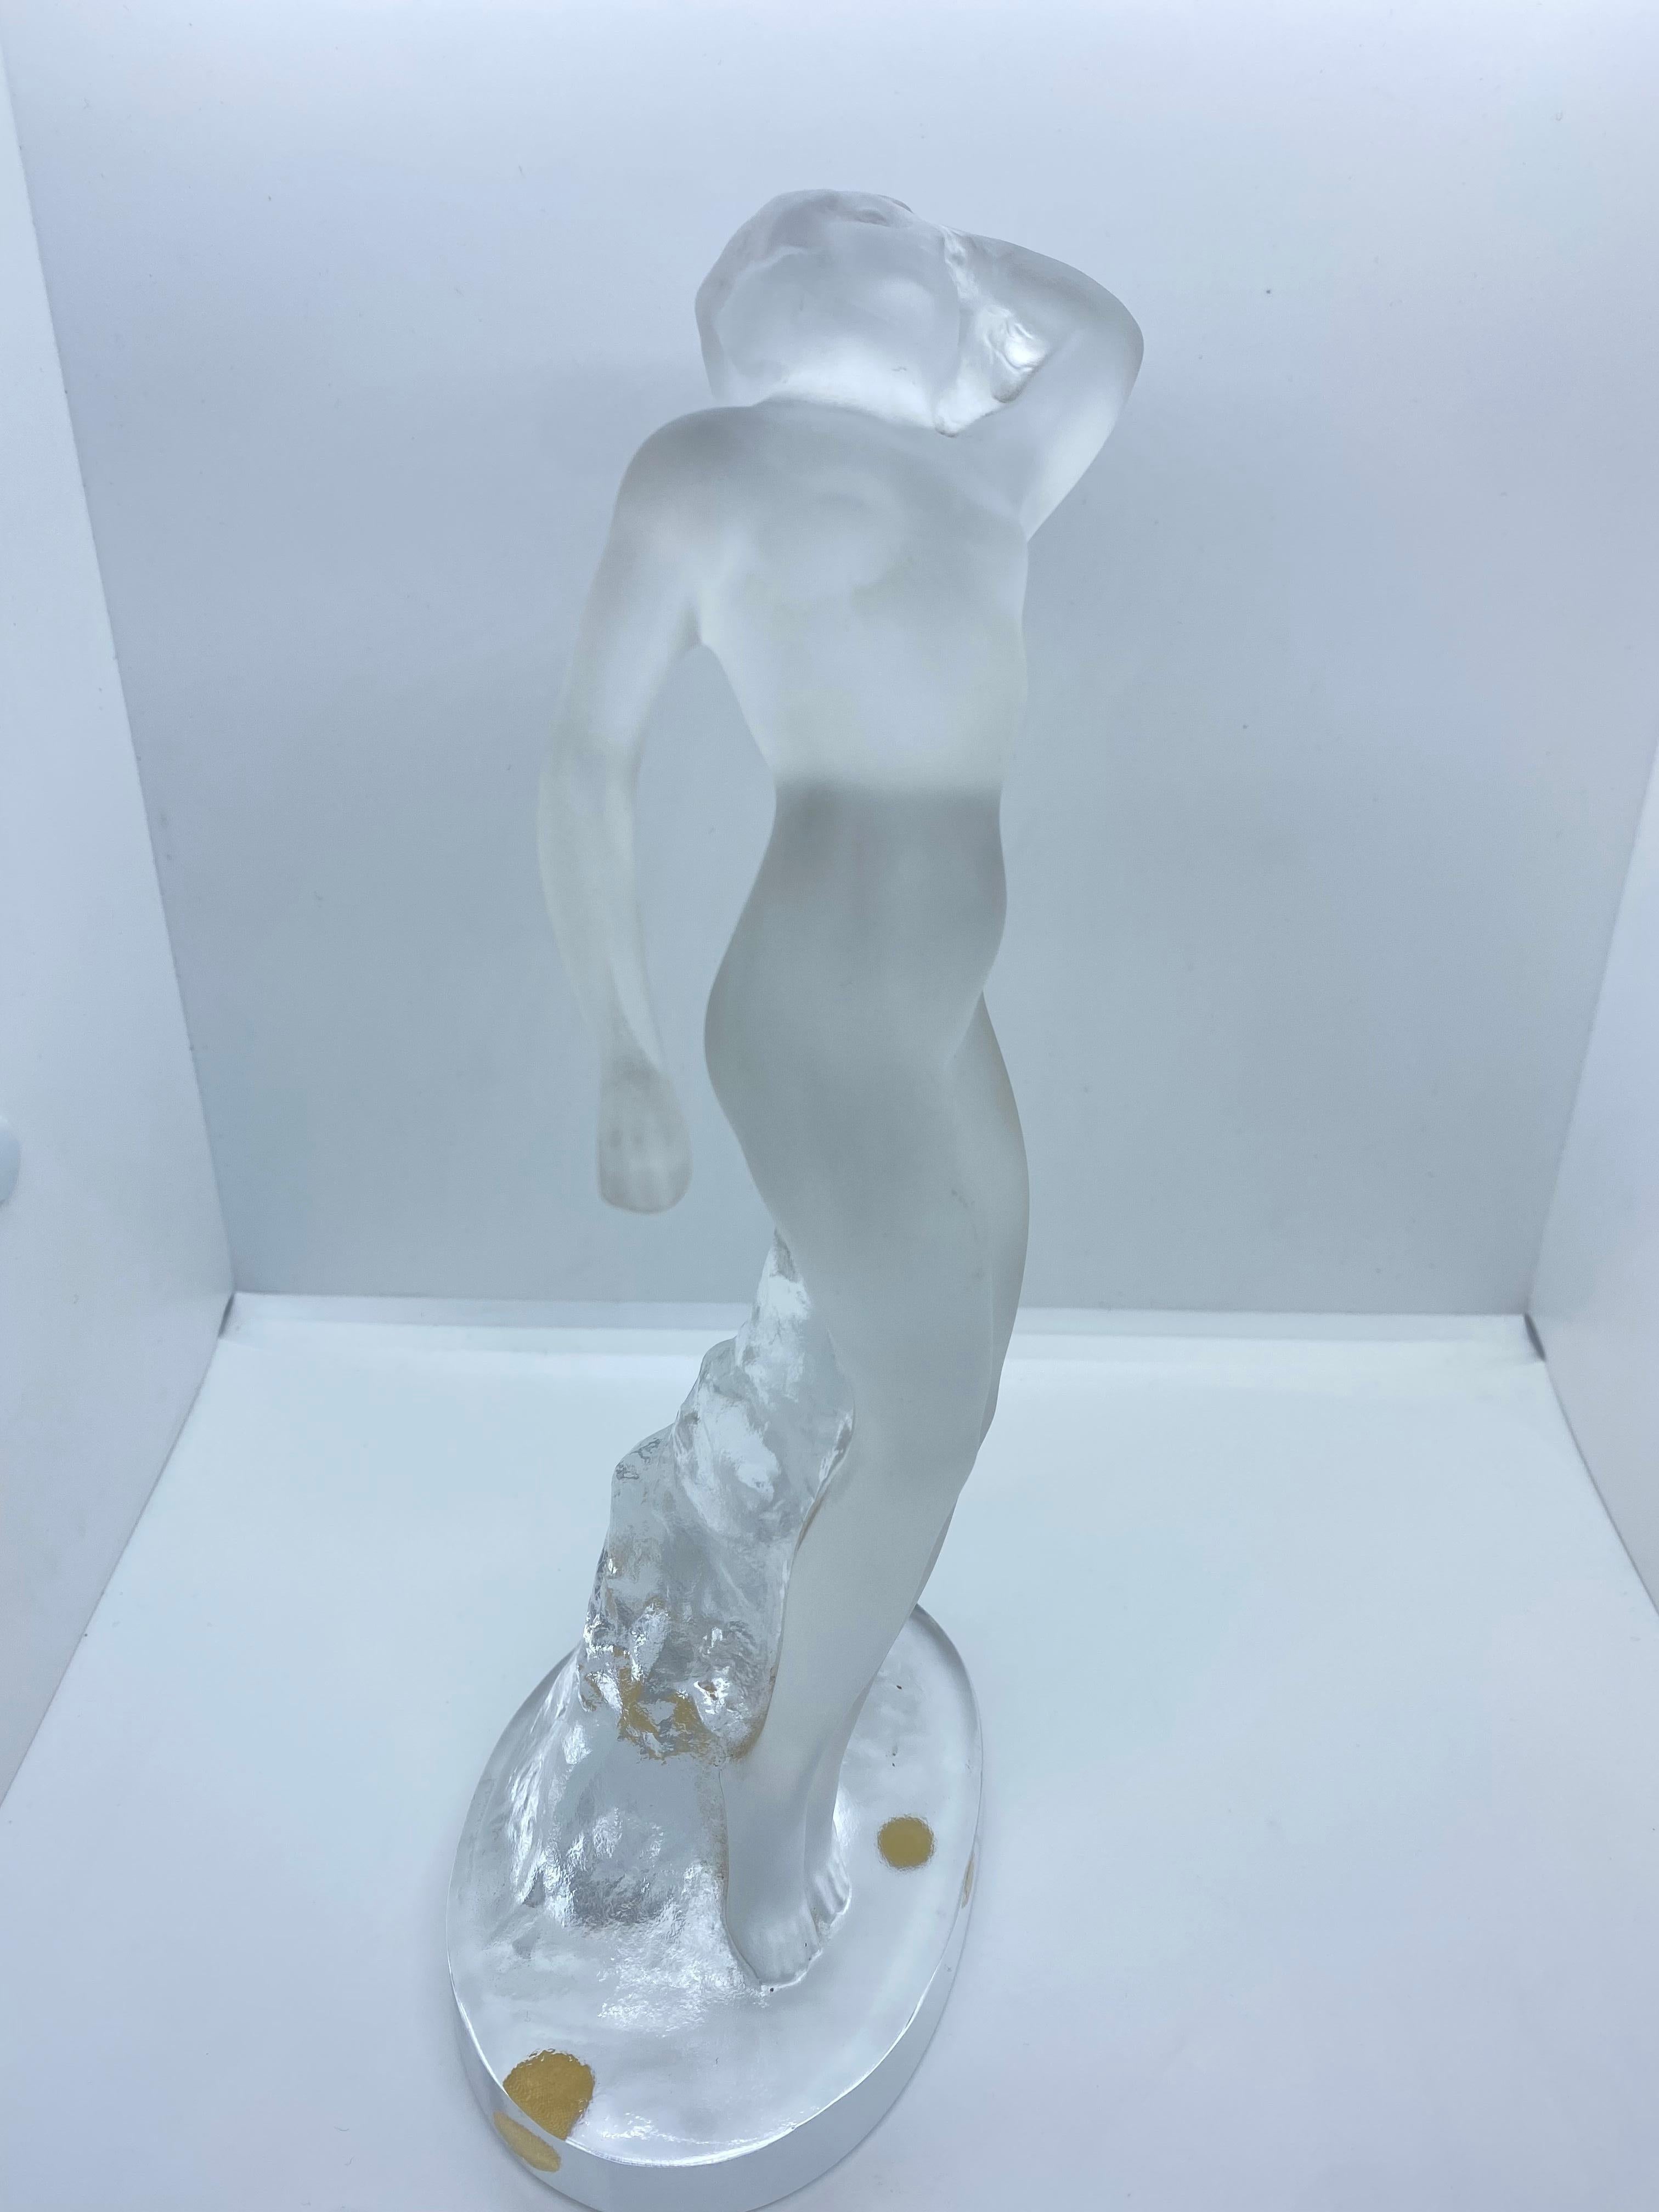 A beautiful crystal sculpture of a naked woman in an erotic pose, stylishly rendered. The crystal is matted while the foot is transparent.The sculpture features a frosted female nude dancer with one arm up and one arm down standing on a clear oval